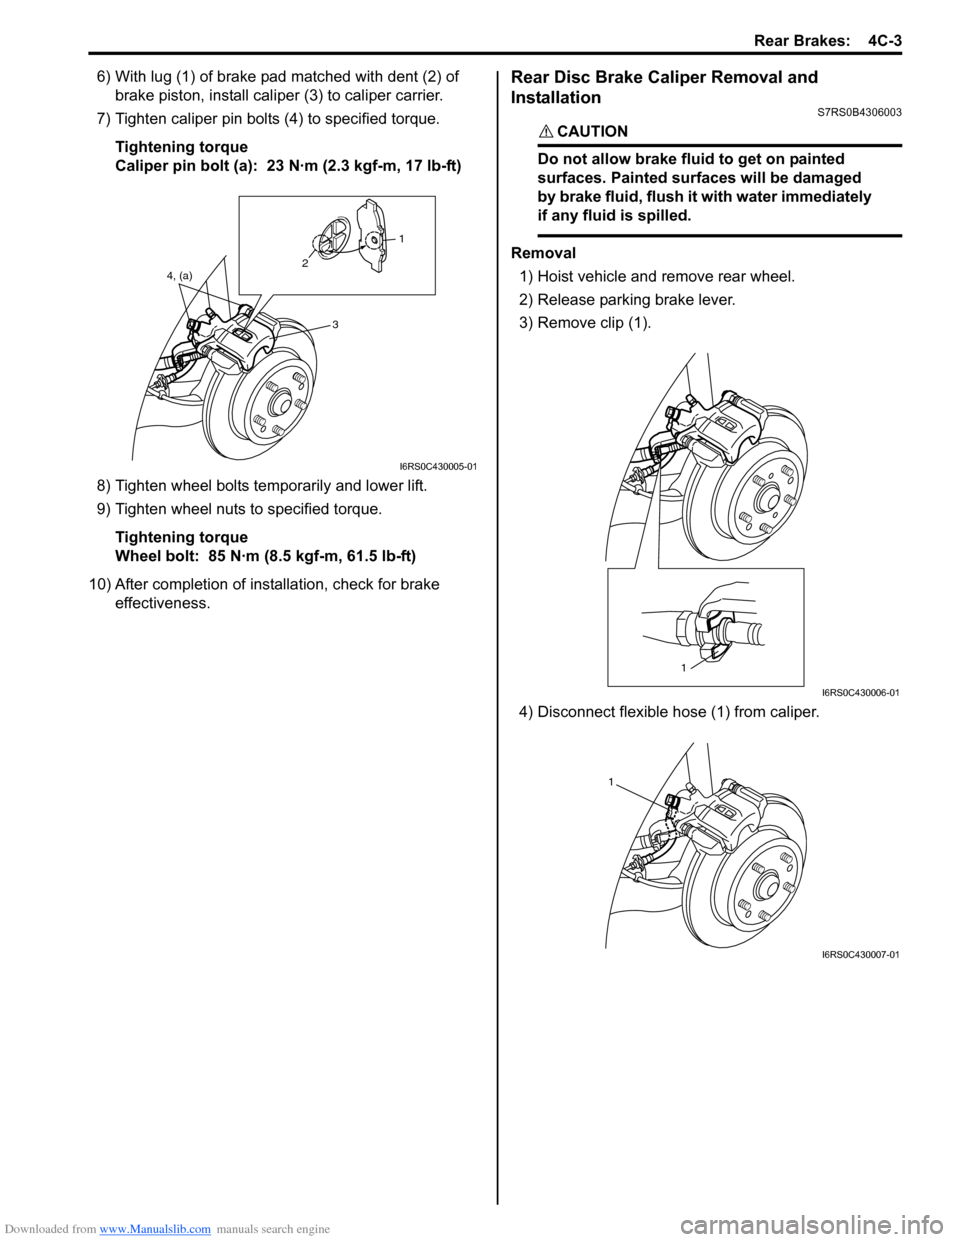 SUZUKI SWIFT 2005 2.G Service Owners Manual Downloaded from www.Manualslib.com manuals search engine Rear Brakes:  4C-3
6) With lug (1) of brake pad matched with dent (2) of brake piston, install caliper  (3) to caliper carrier.
7) Tighten cali